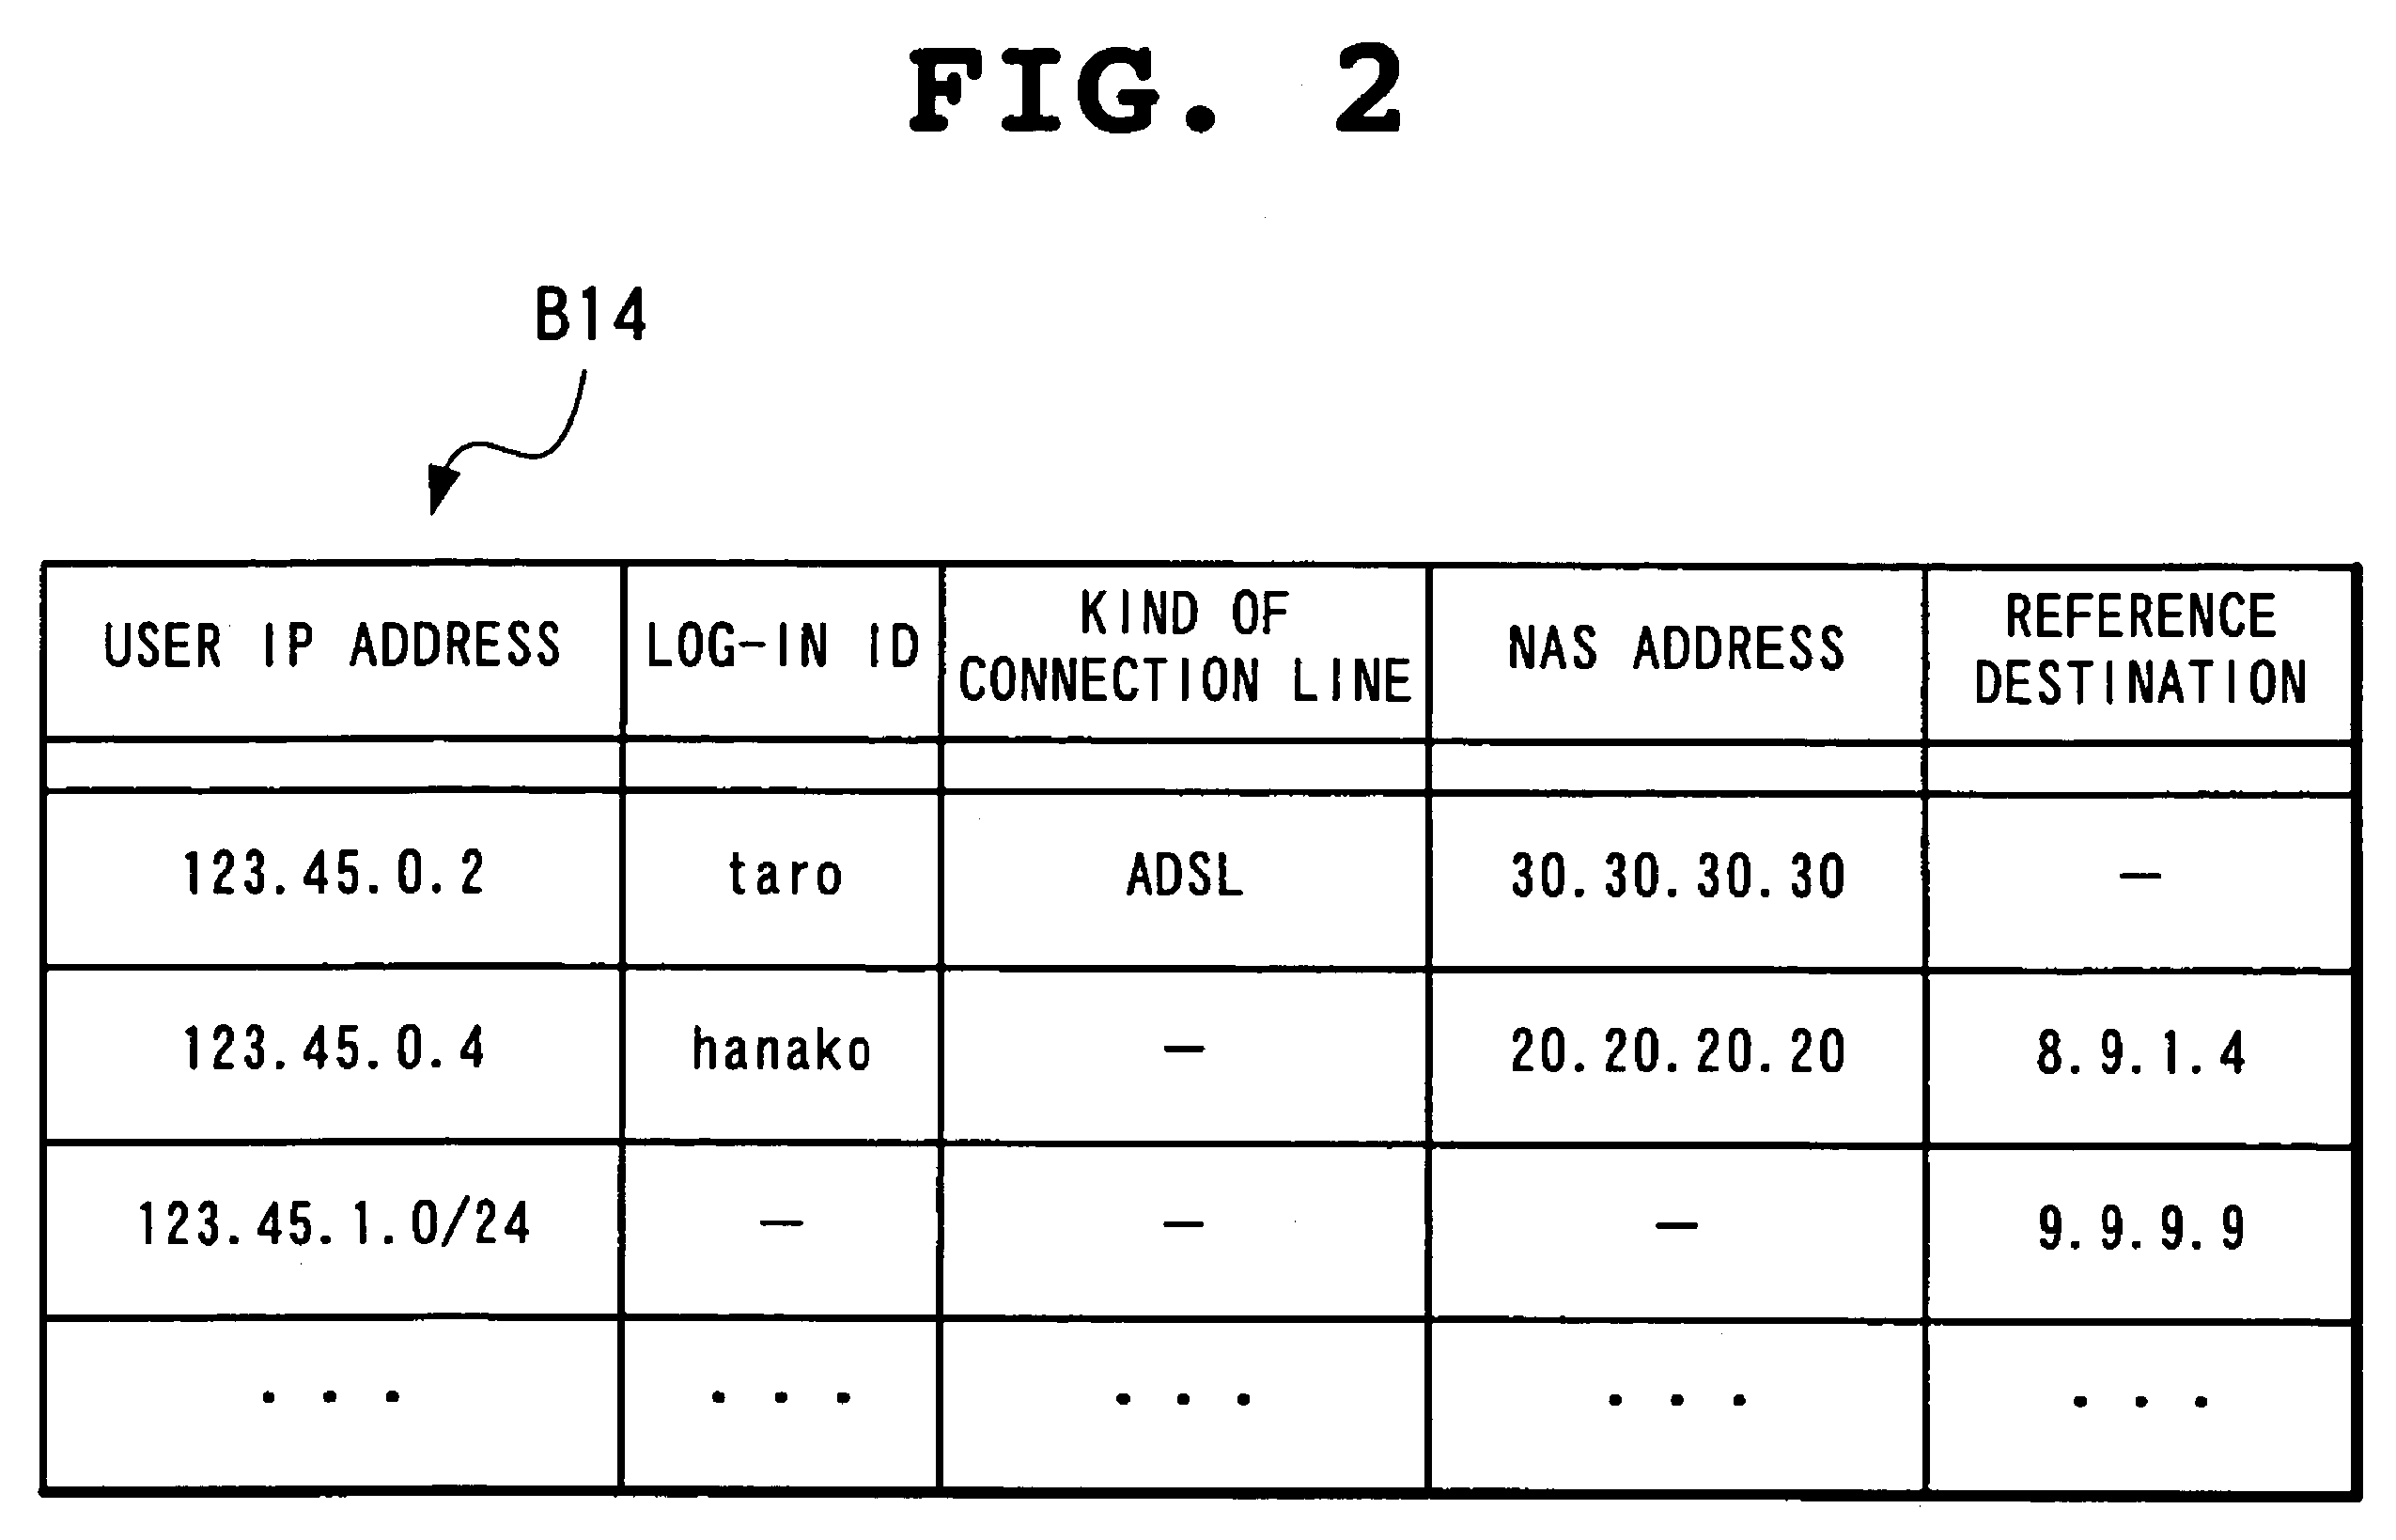 Name resolution server and packet transfer device